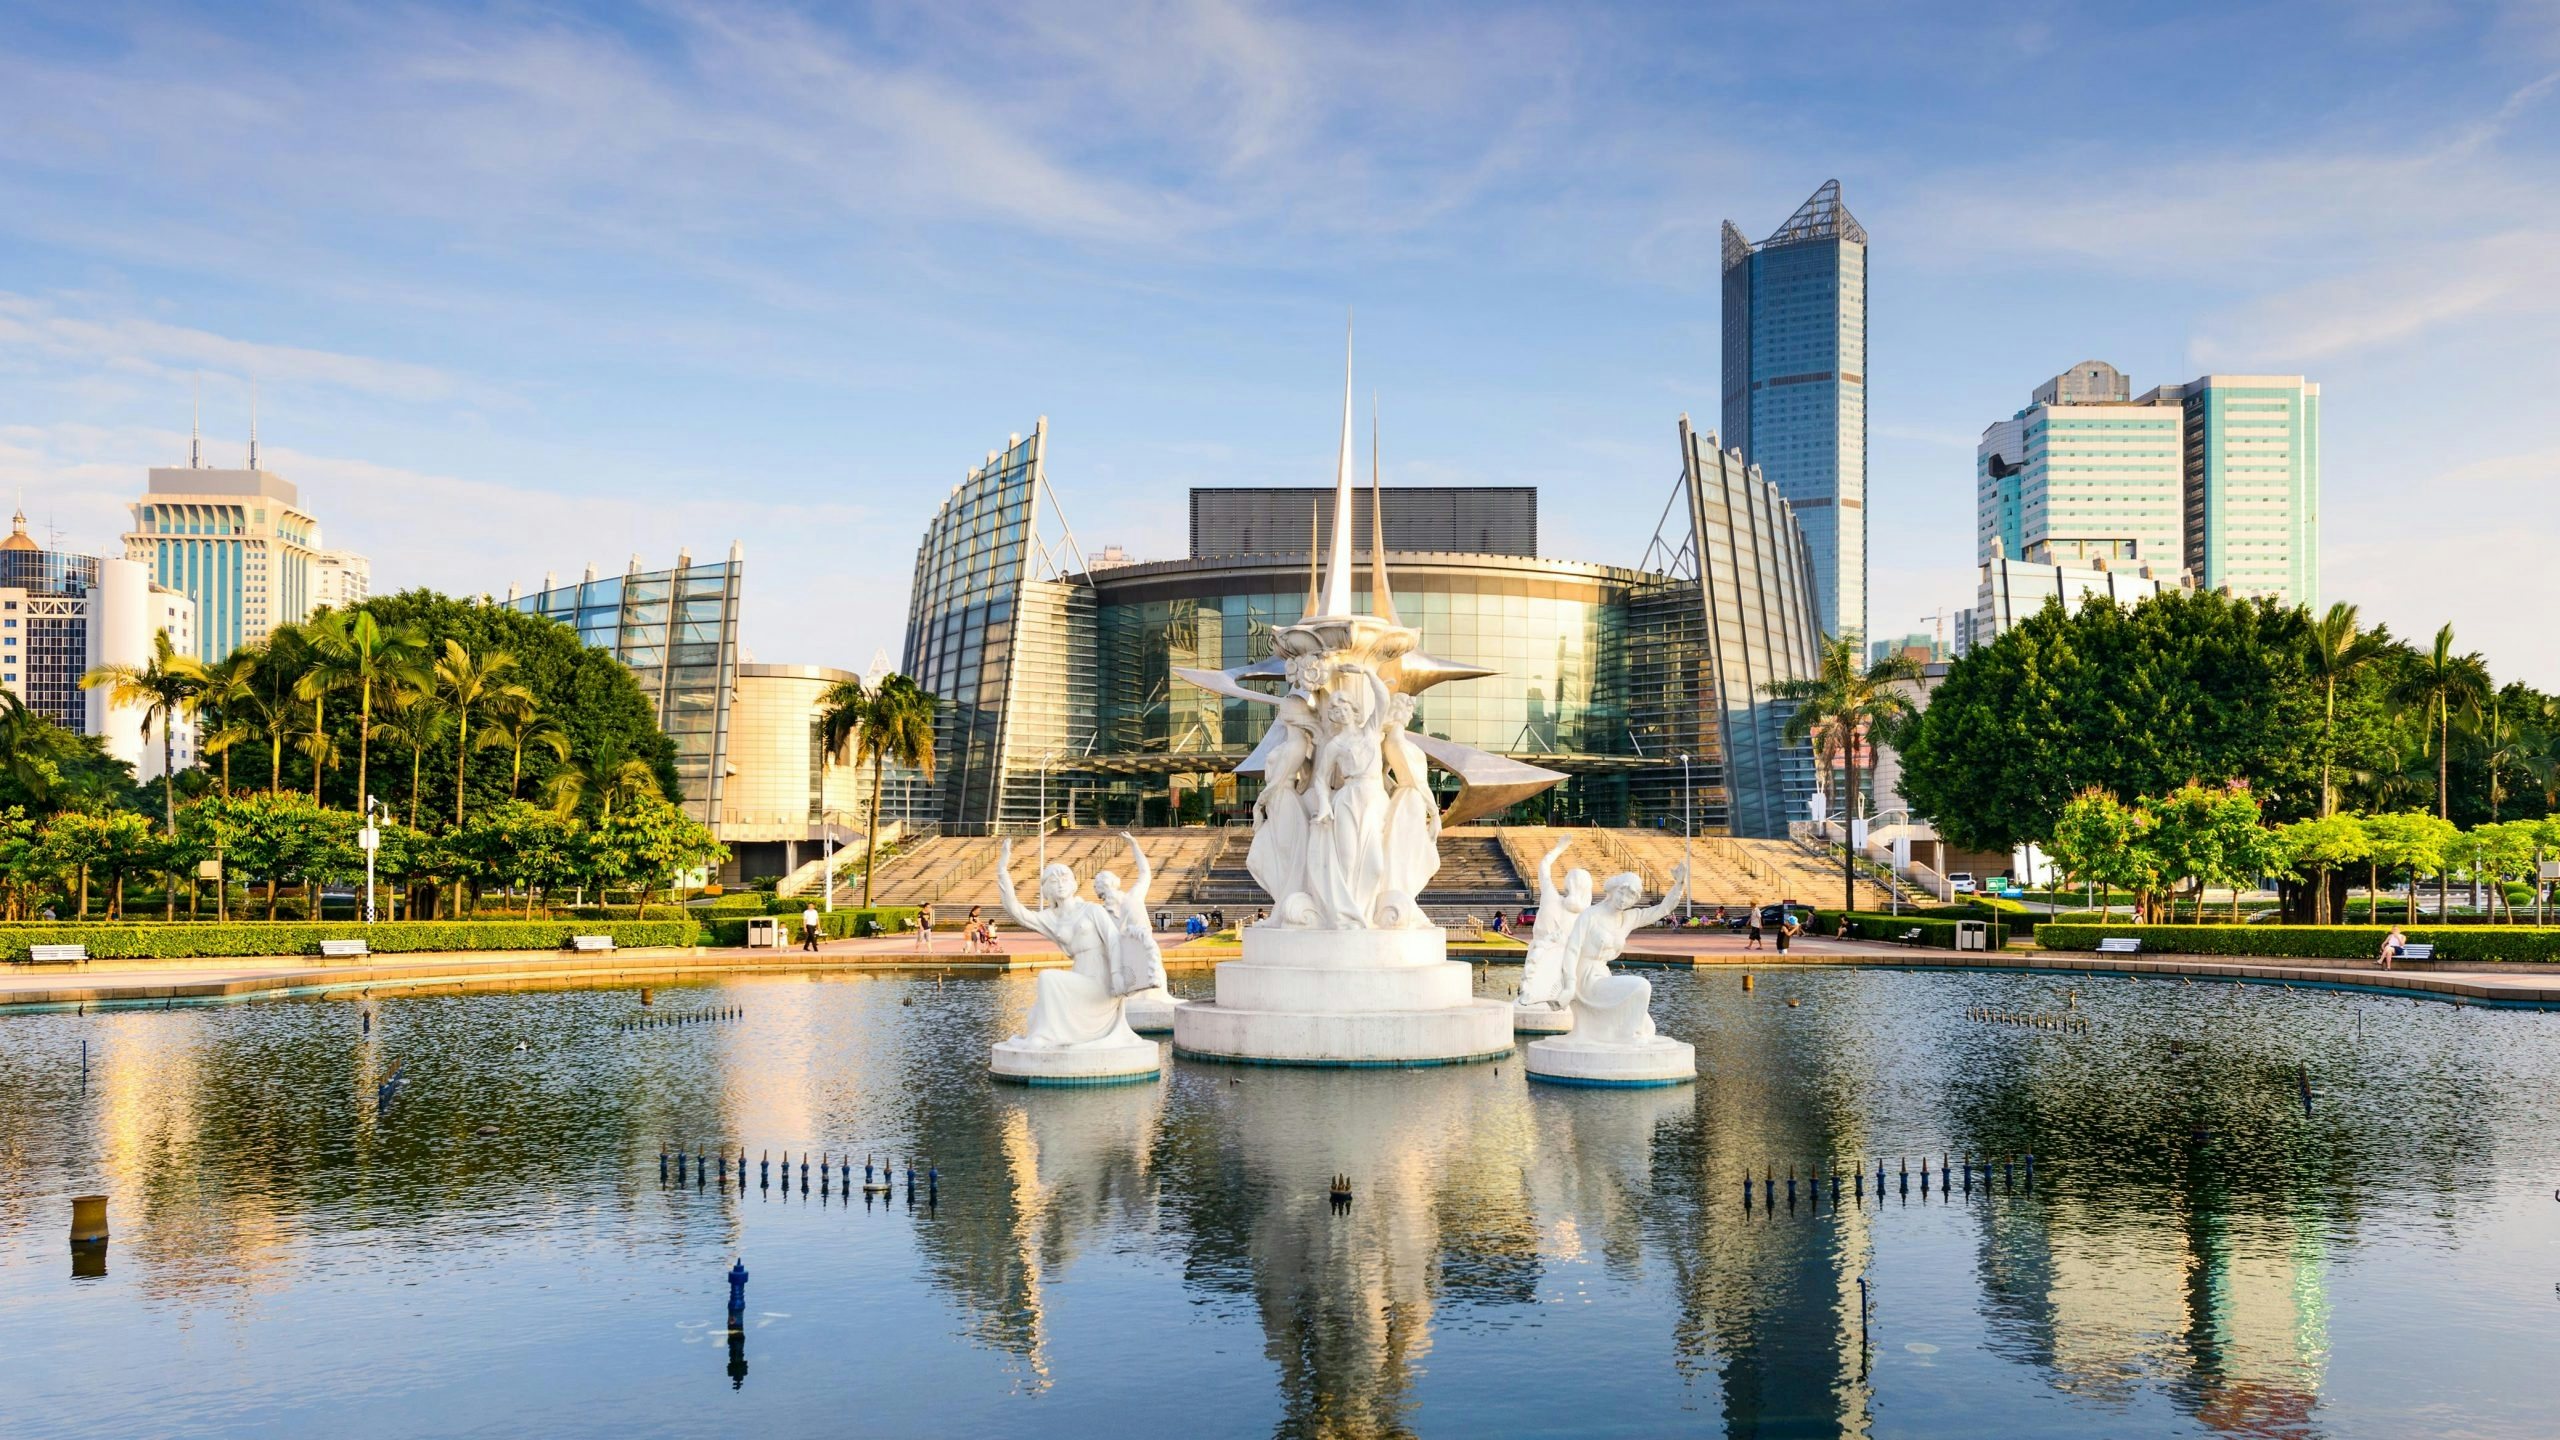 China Duty Free Group plans to open a major duty-free store in second-tier city Fuzhou. How will the move impact China’s duty-free retail landscape? Photo: Shutterstock